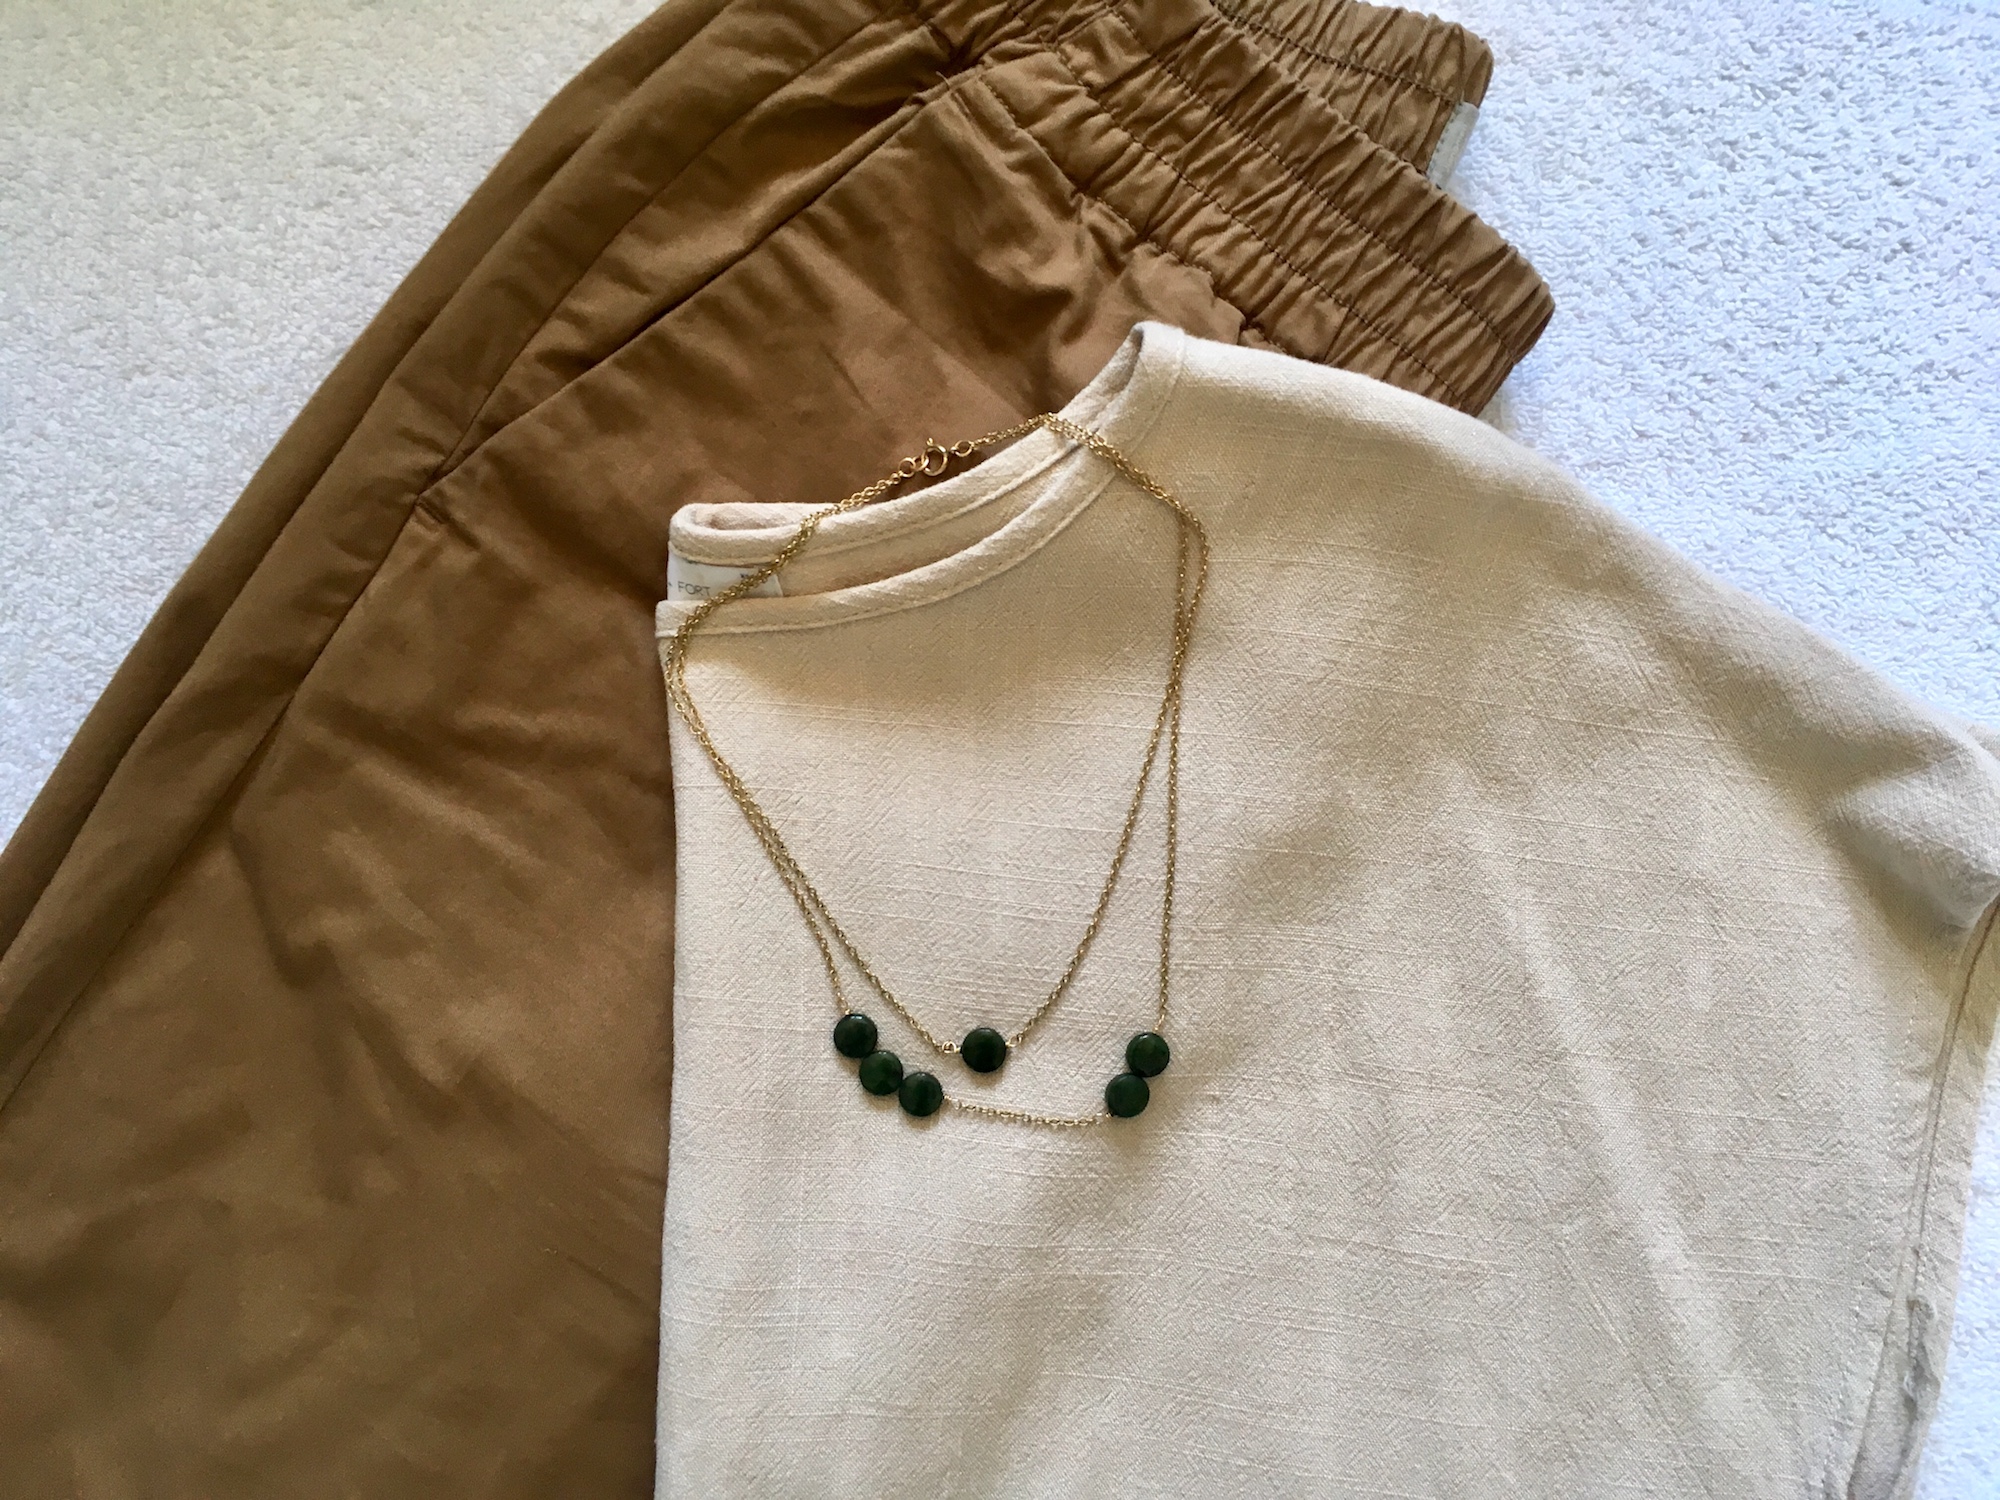 A ochre pants and a beige top lay on a white background. A gold necklace with green beads is on top of the shirt.